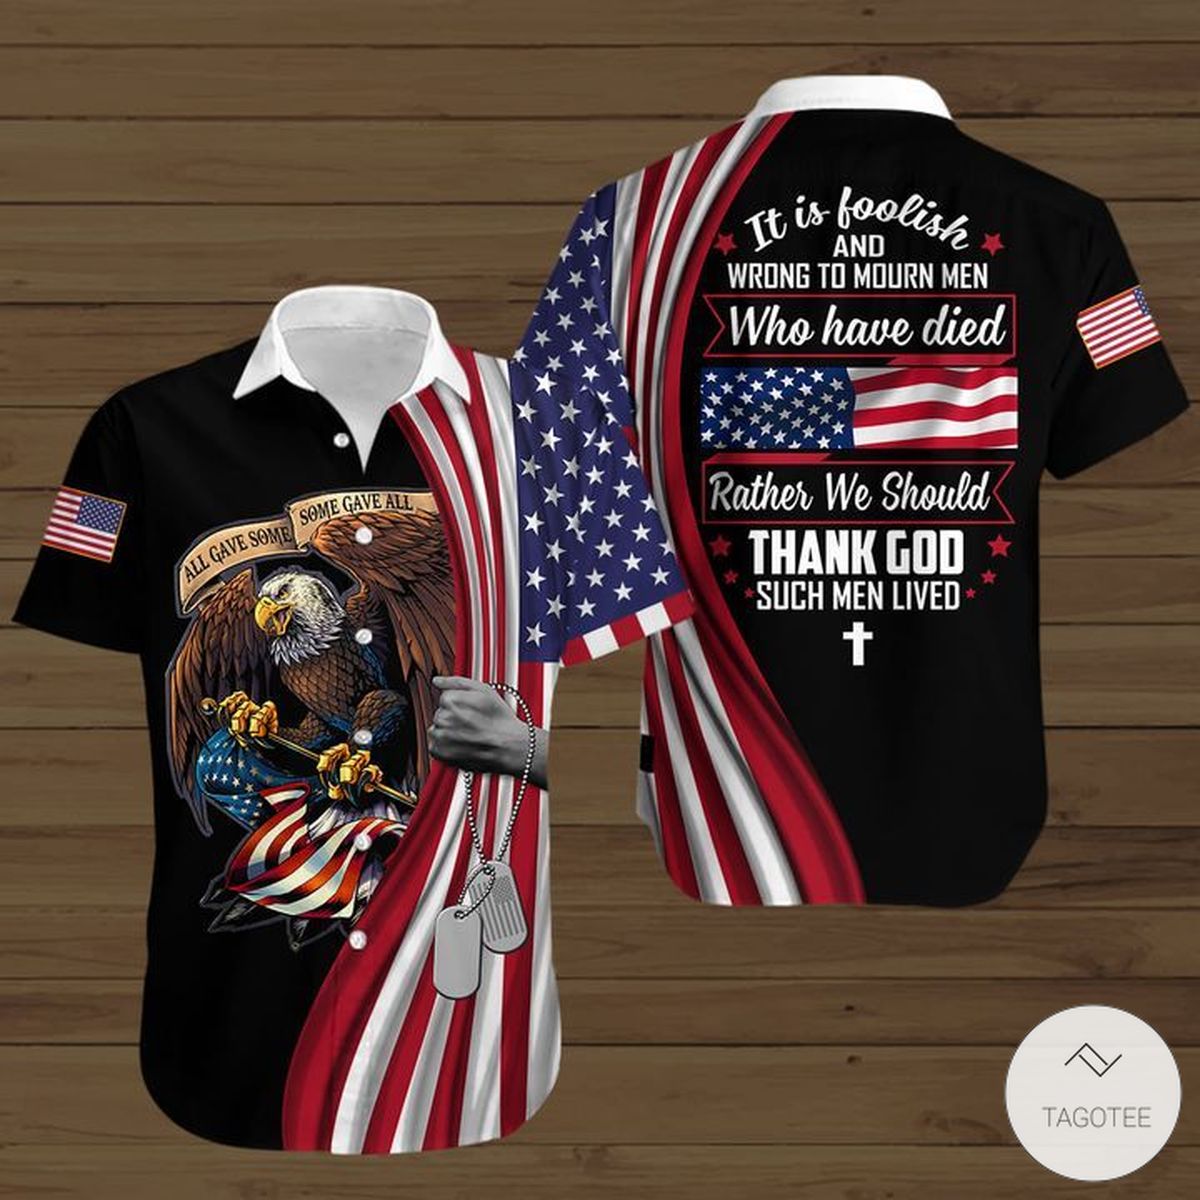 It-Is-Foolish-And-Wrong-To-Mourn-Men-Who-Have-Died-Rather-We-Should-Thank-God-Such-Men-Lived-Button-Shirt